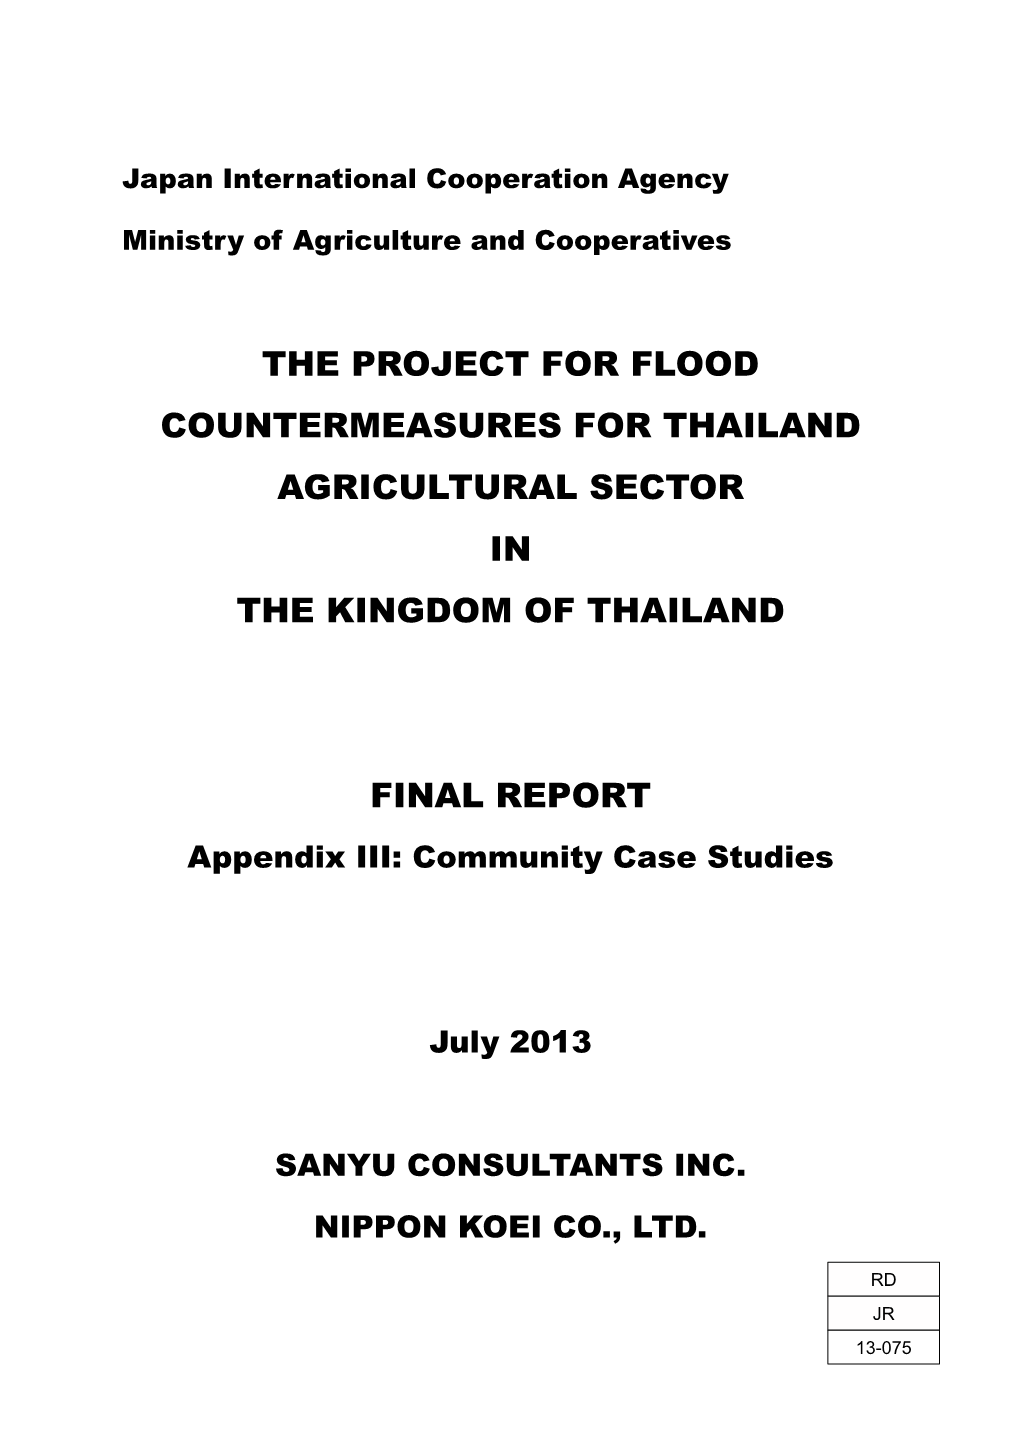 The Project for Flood Countermeasures for Thailand Agricultural Sector in the Kingdom of Thailand